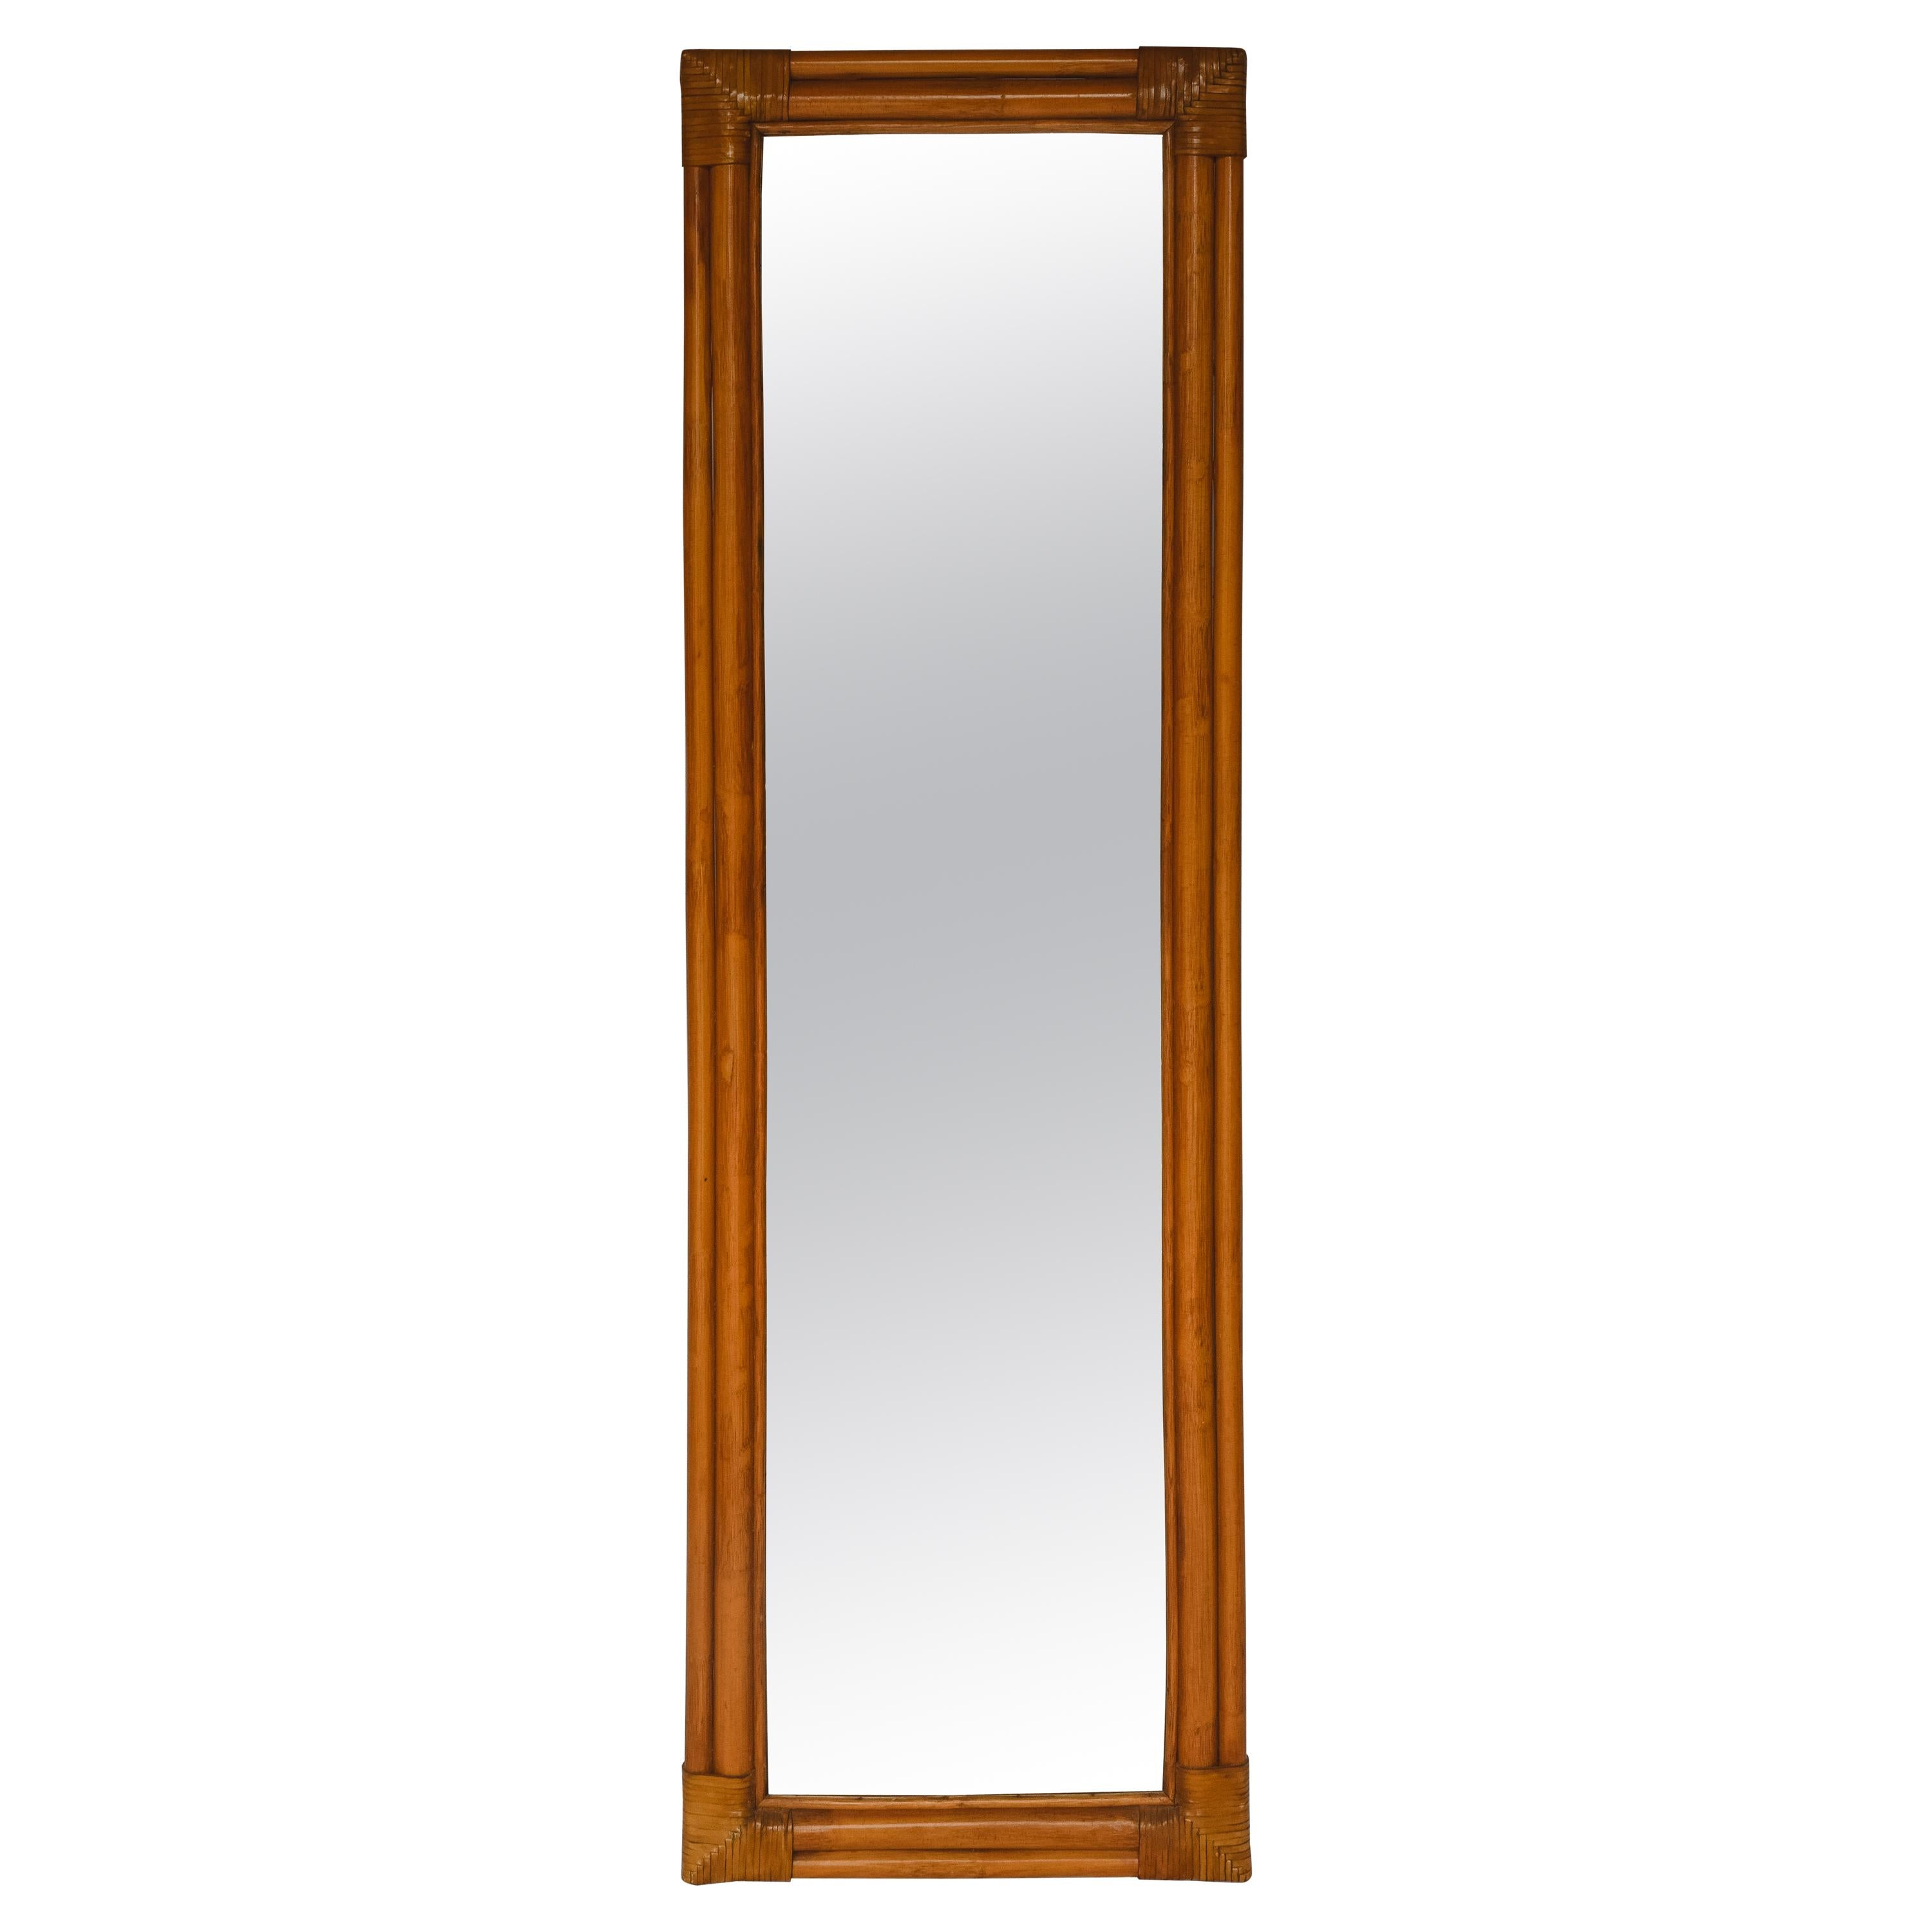 Bamboo Mirror For Sale